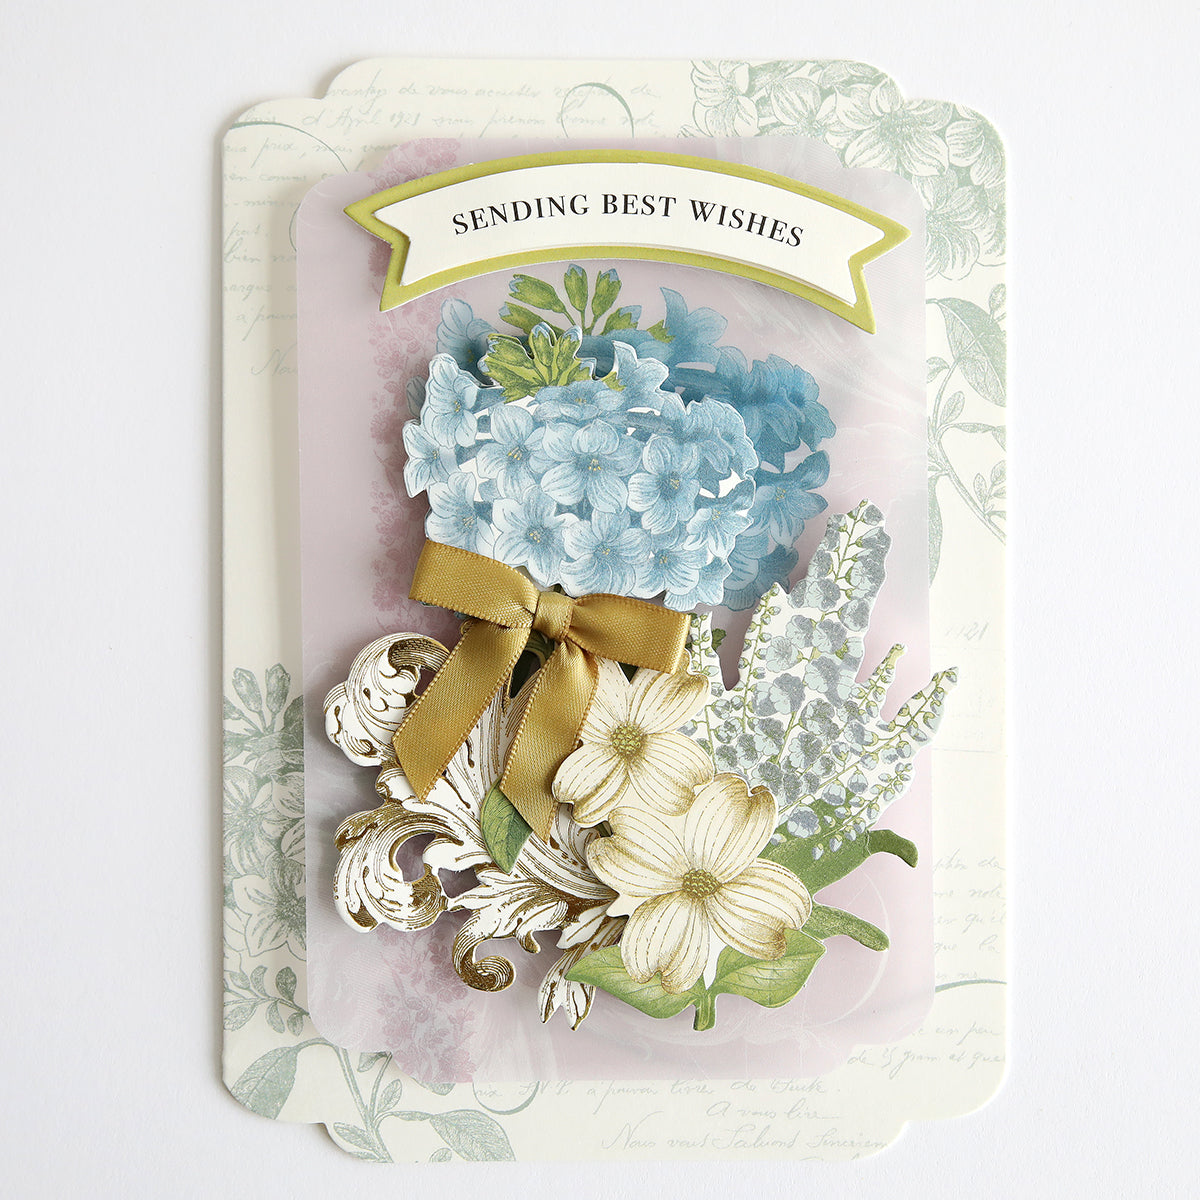 Simply Perfect Patterns Card Making Kit featuring a floral arrangement with blue and white flowers, adorned with a golden ribbon and 3D embellishments, on a vintage background with text "sending best wishes.